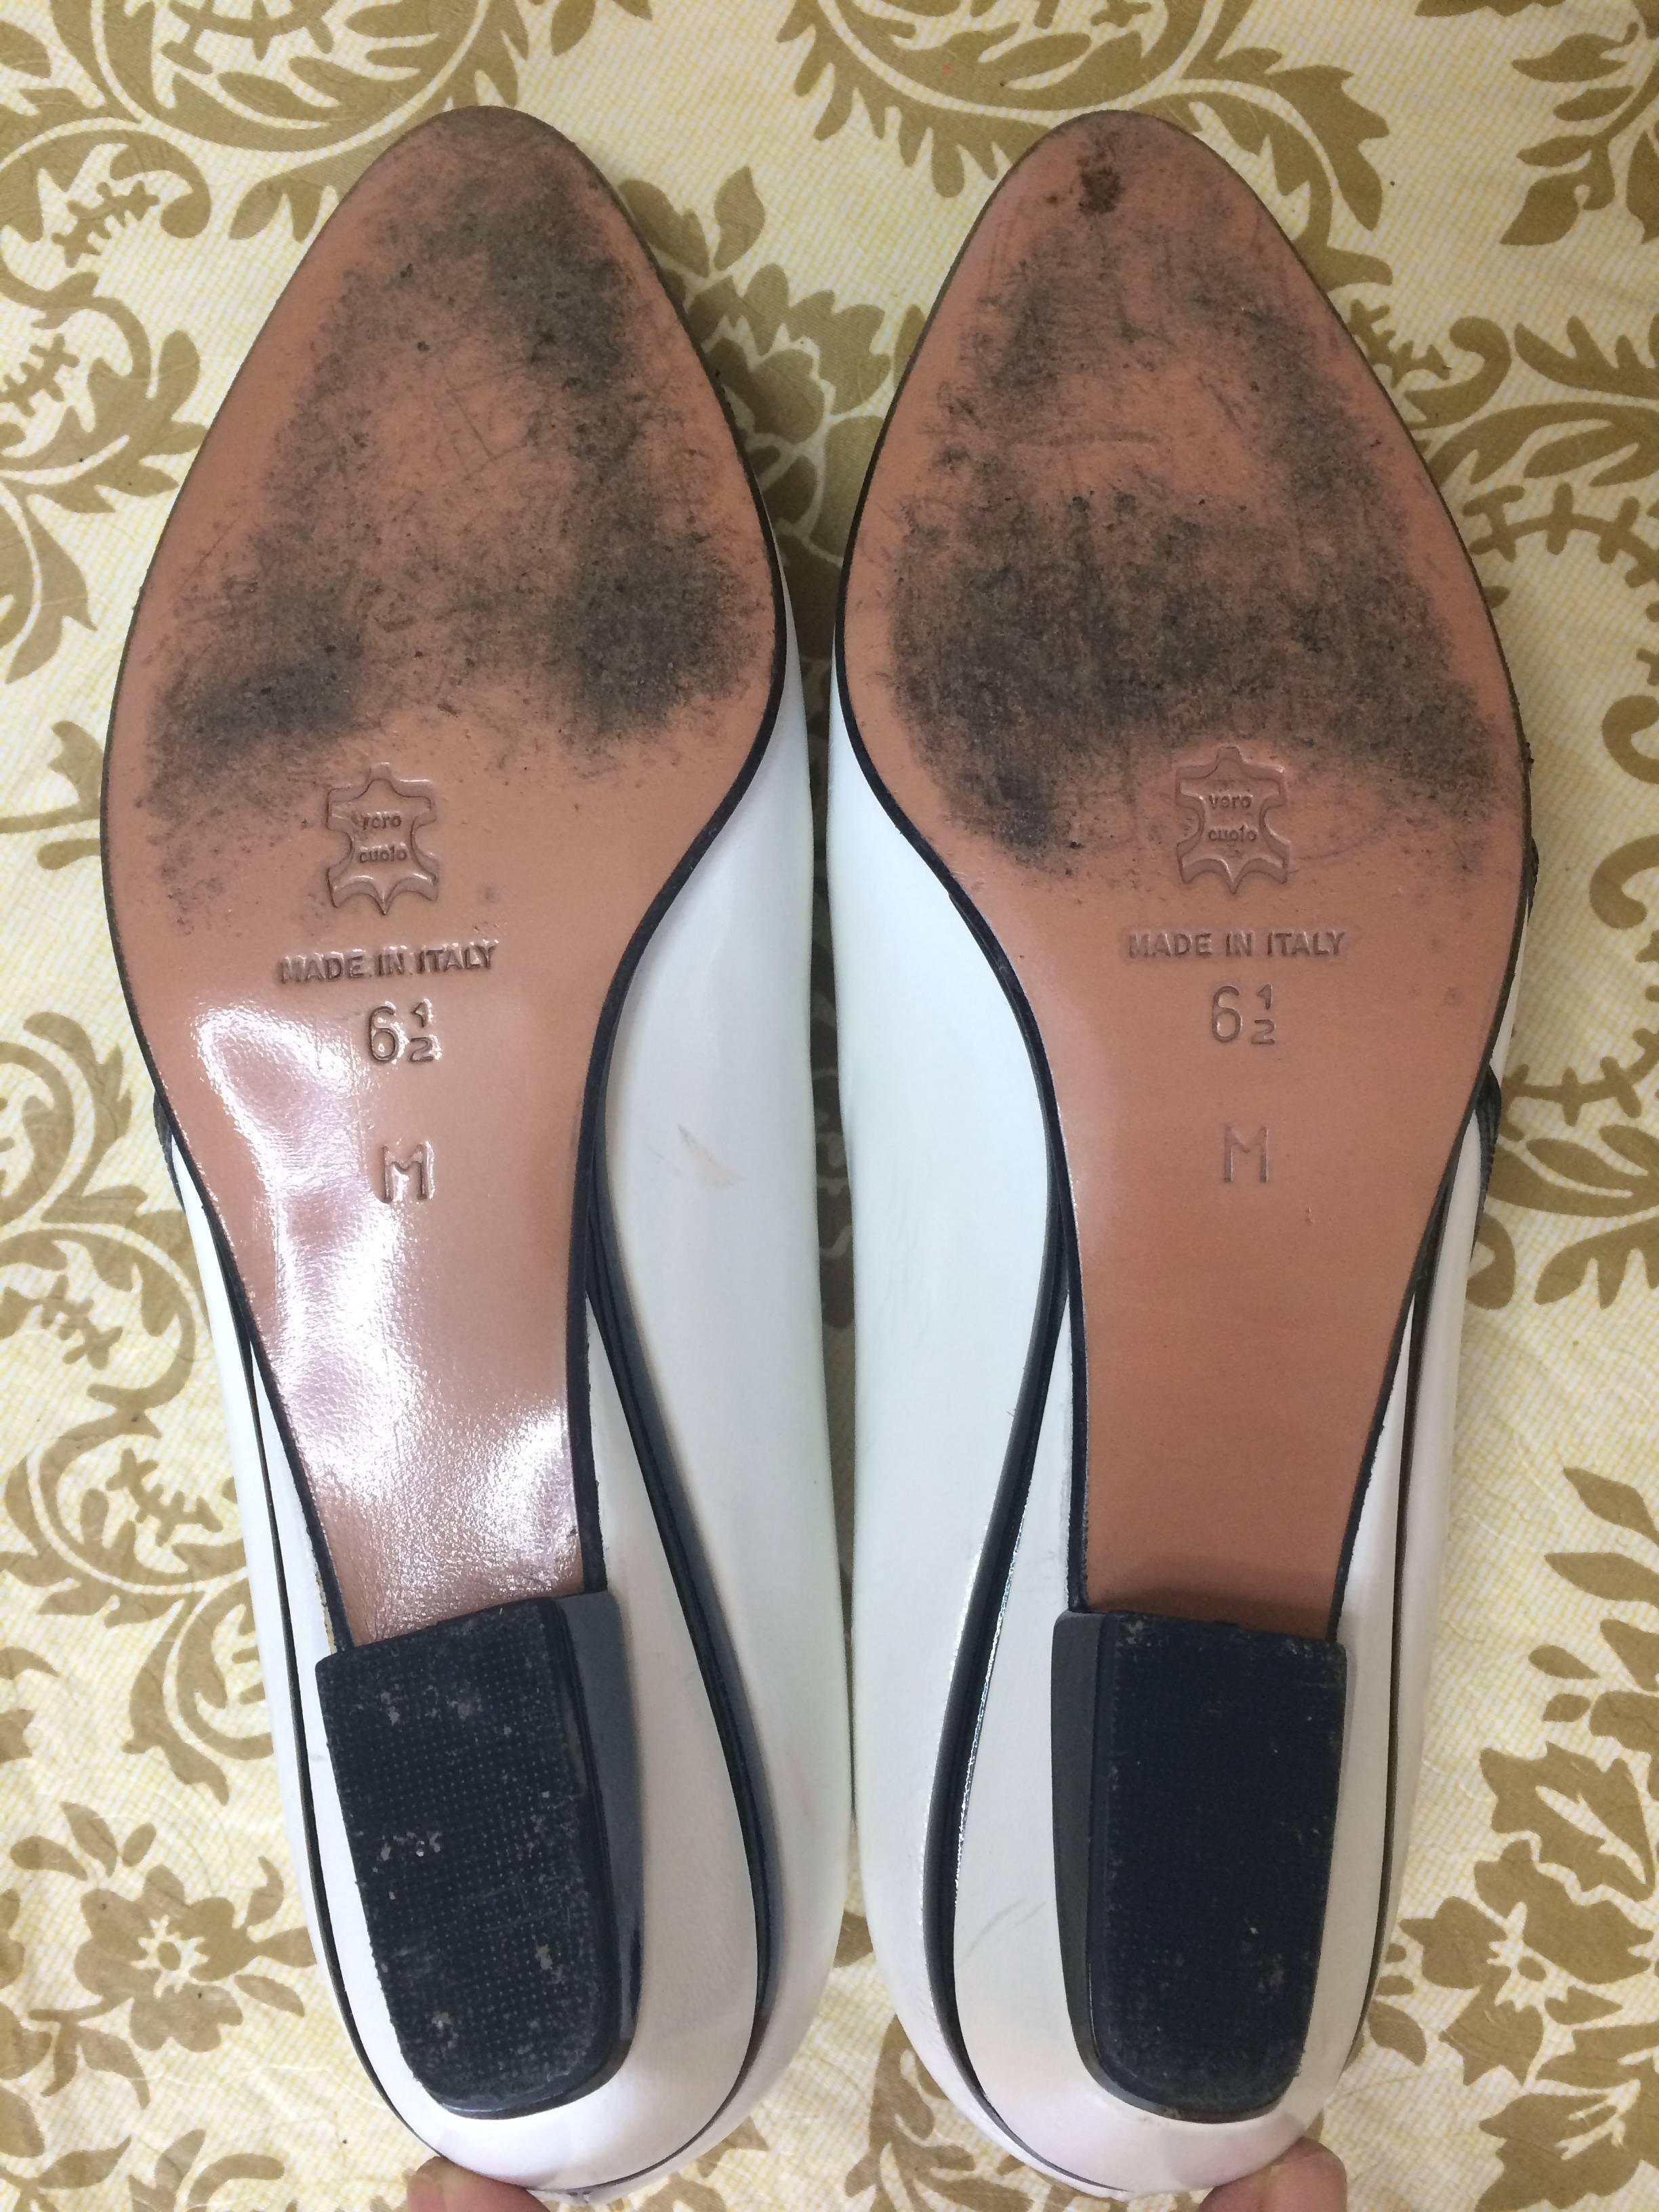 Vintage BALLY white and black leather flat shoes, pumps with geometric design. 2